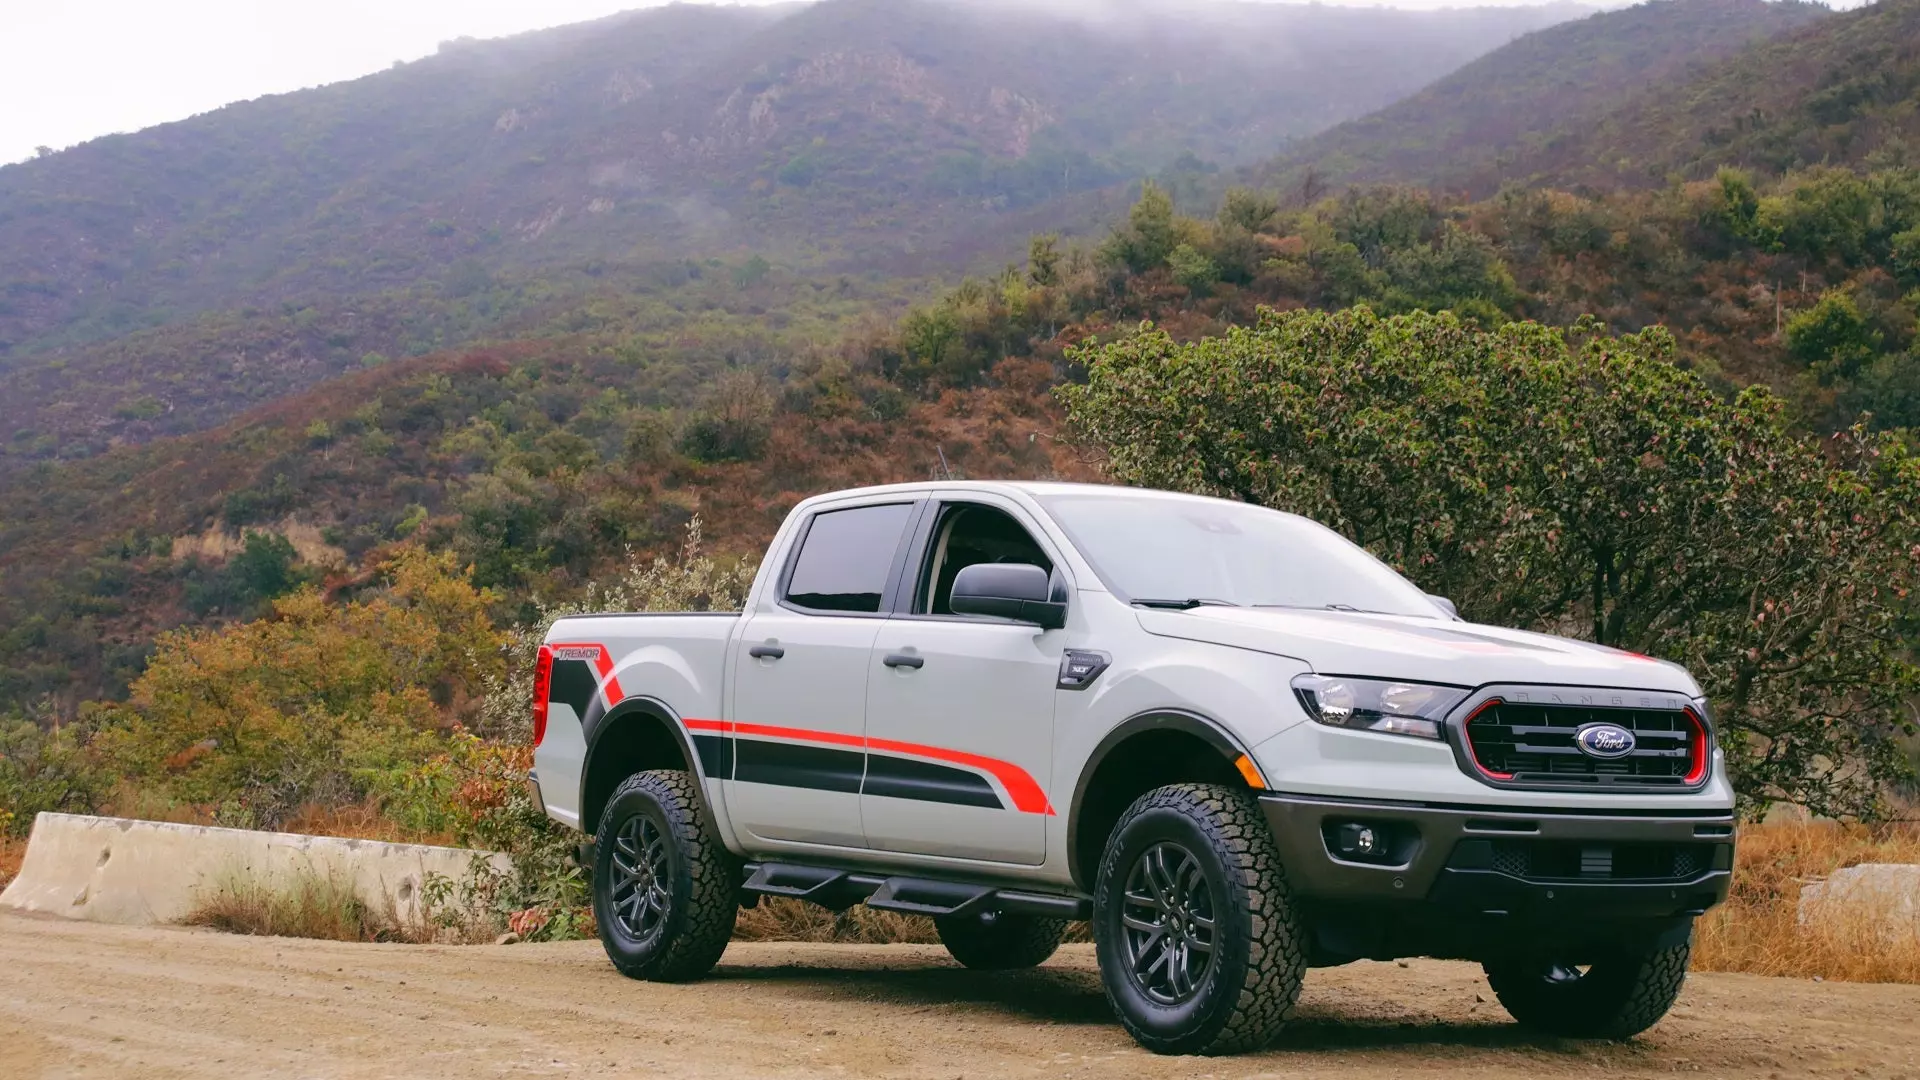 I Might Be Clumsy, But the Ford Ranger Tremor Is a Sure-Footed Off-Roader | Autance